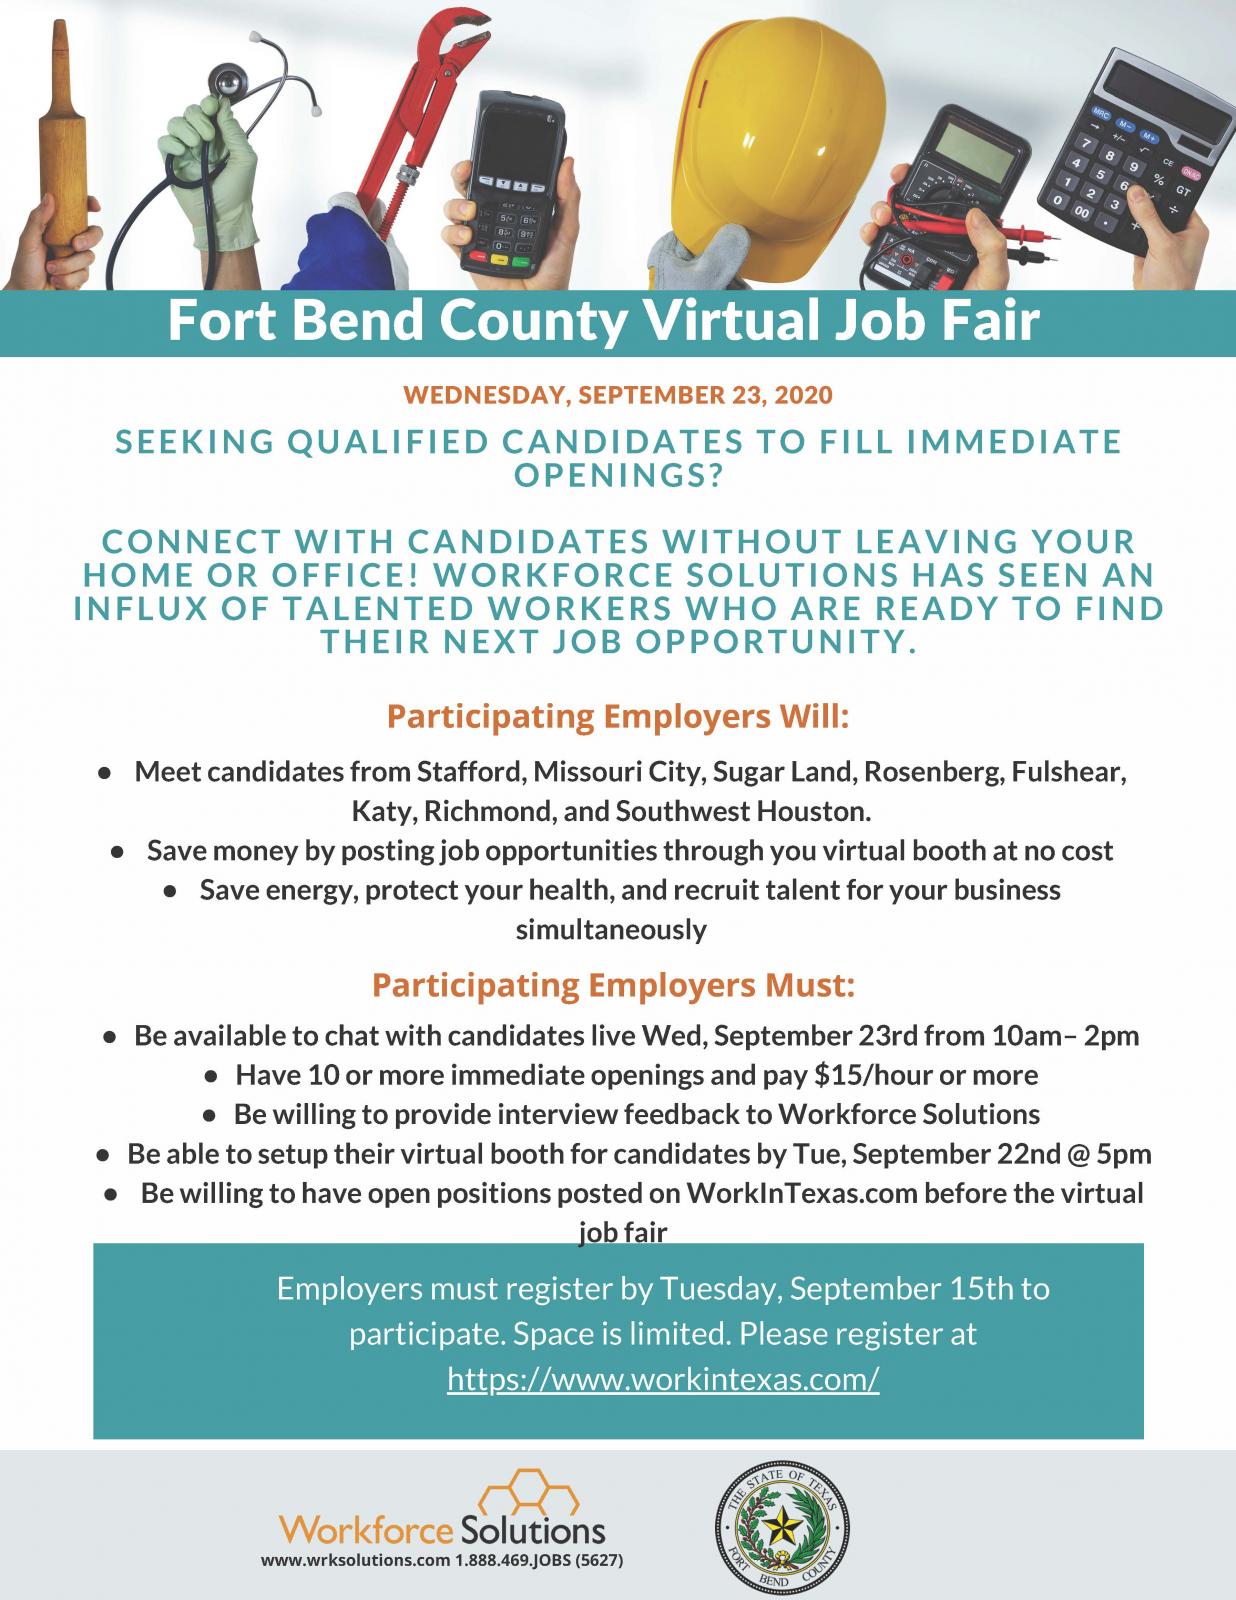 Fort Bend County To Host Virtual Job Fair